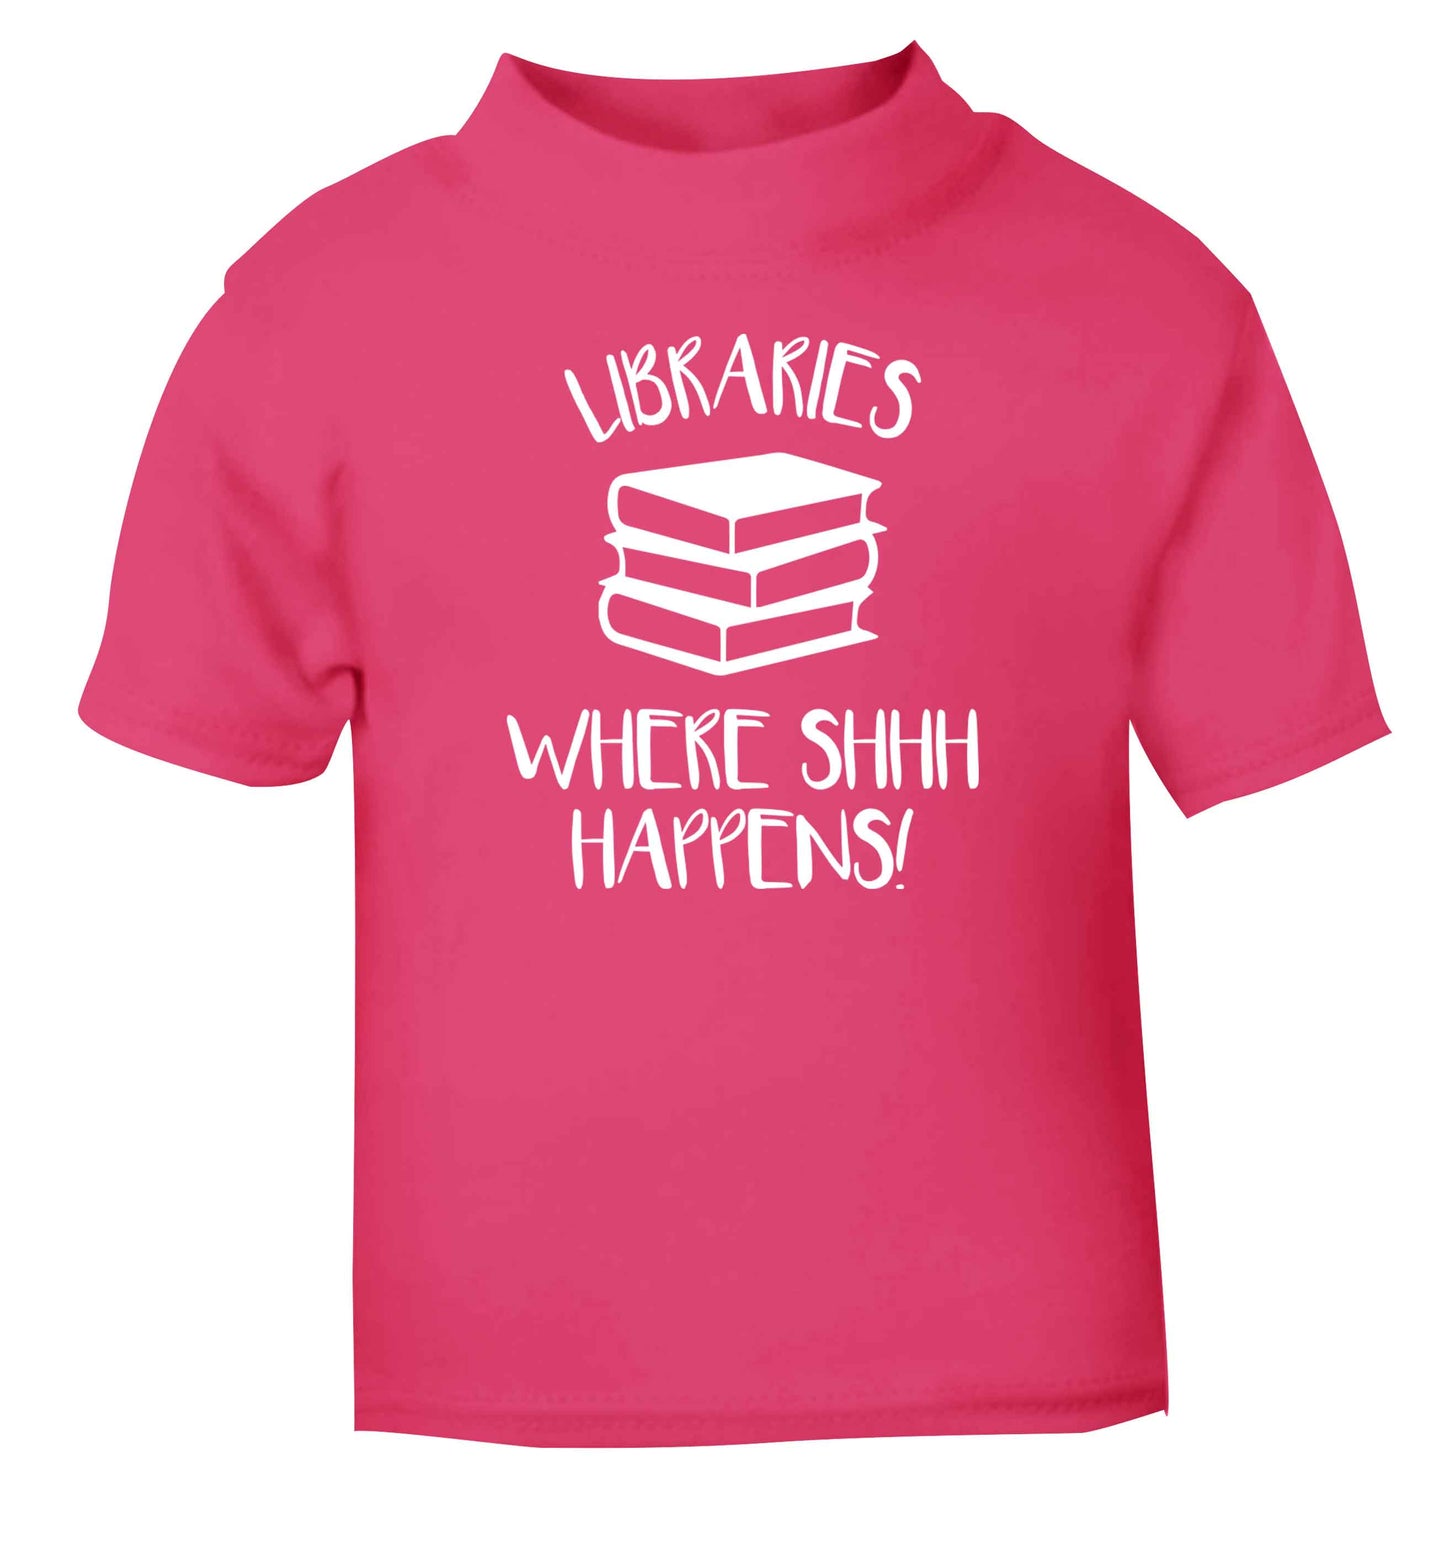 Libraries where shh happens! pink Baby Toddler Tshirt 2 Years